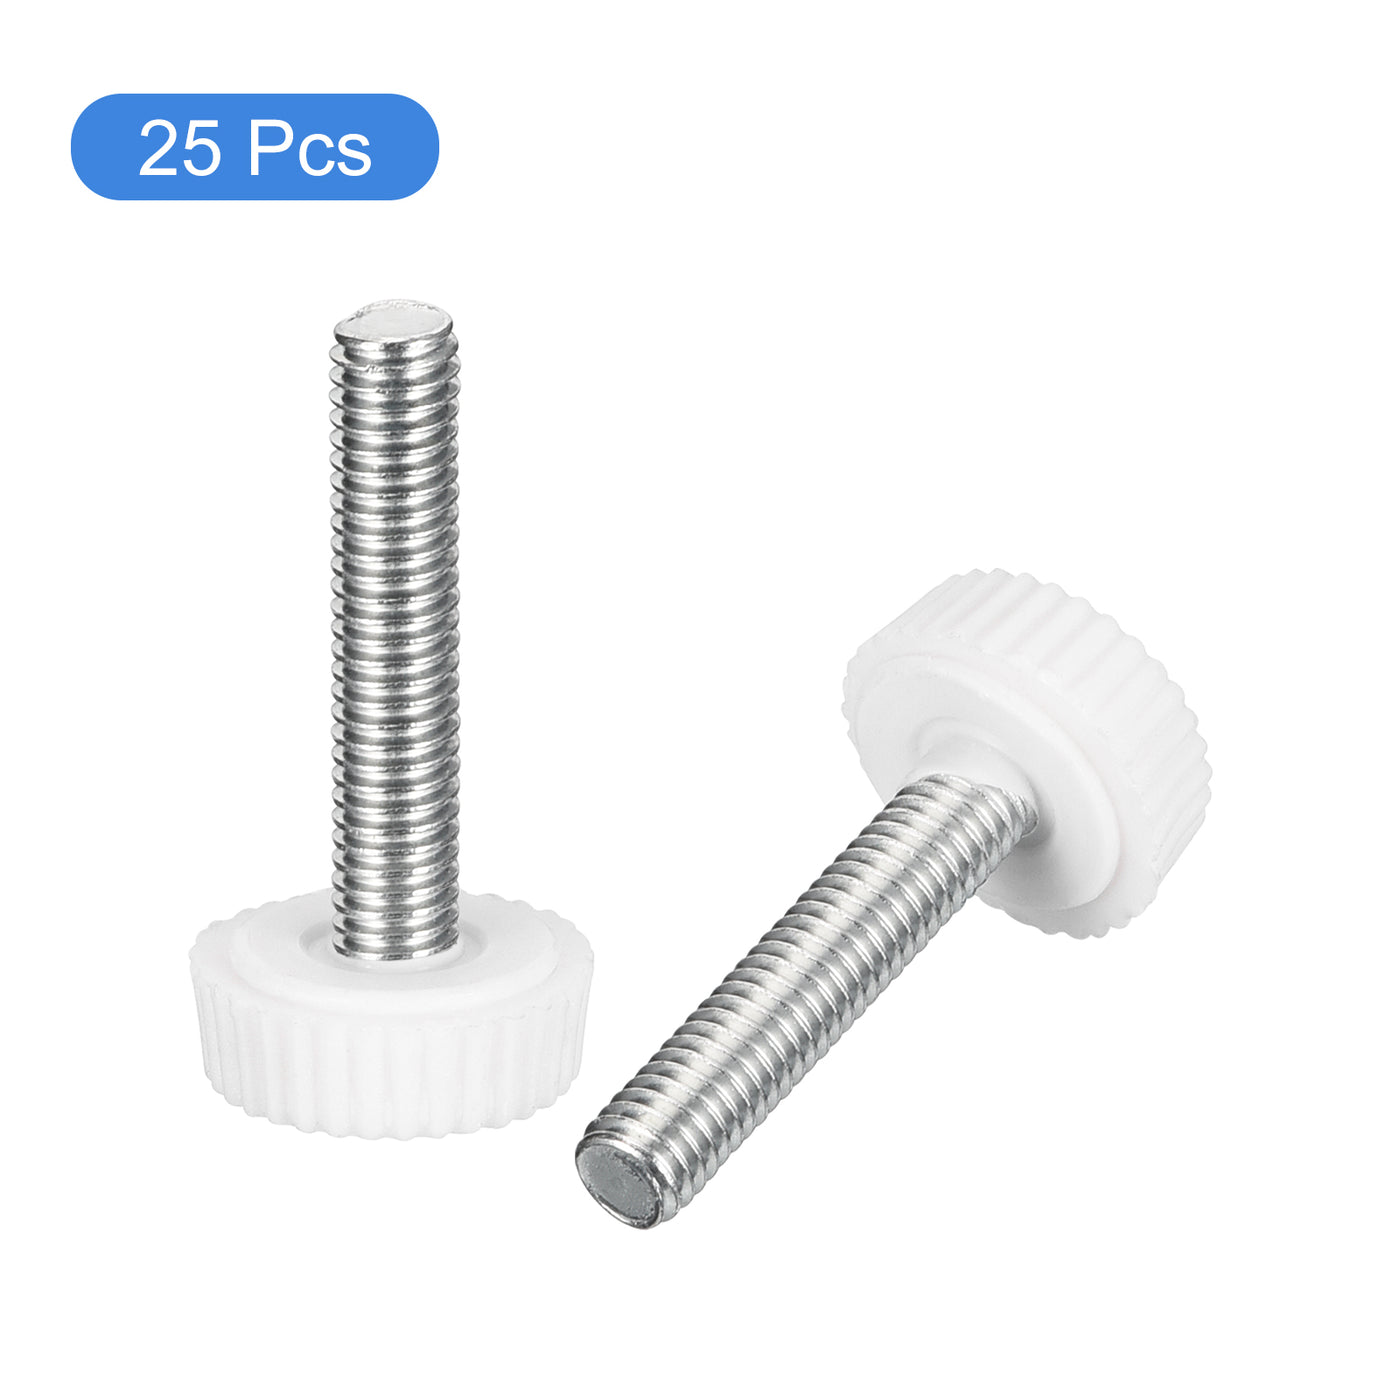 uxcell Uxcell 25Pcs M5x25mm Threaded Knurled Thumb Screws, Zinc Plated Carbon Steel White